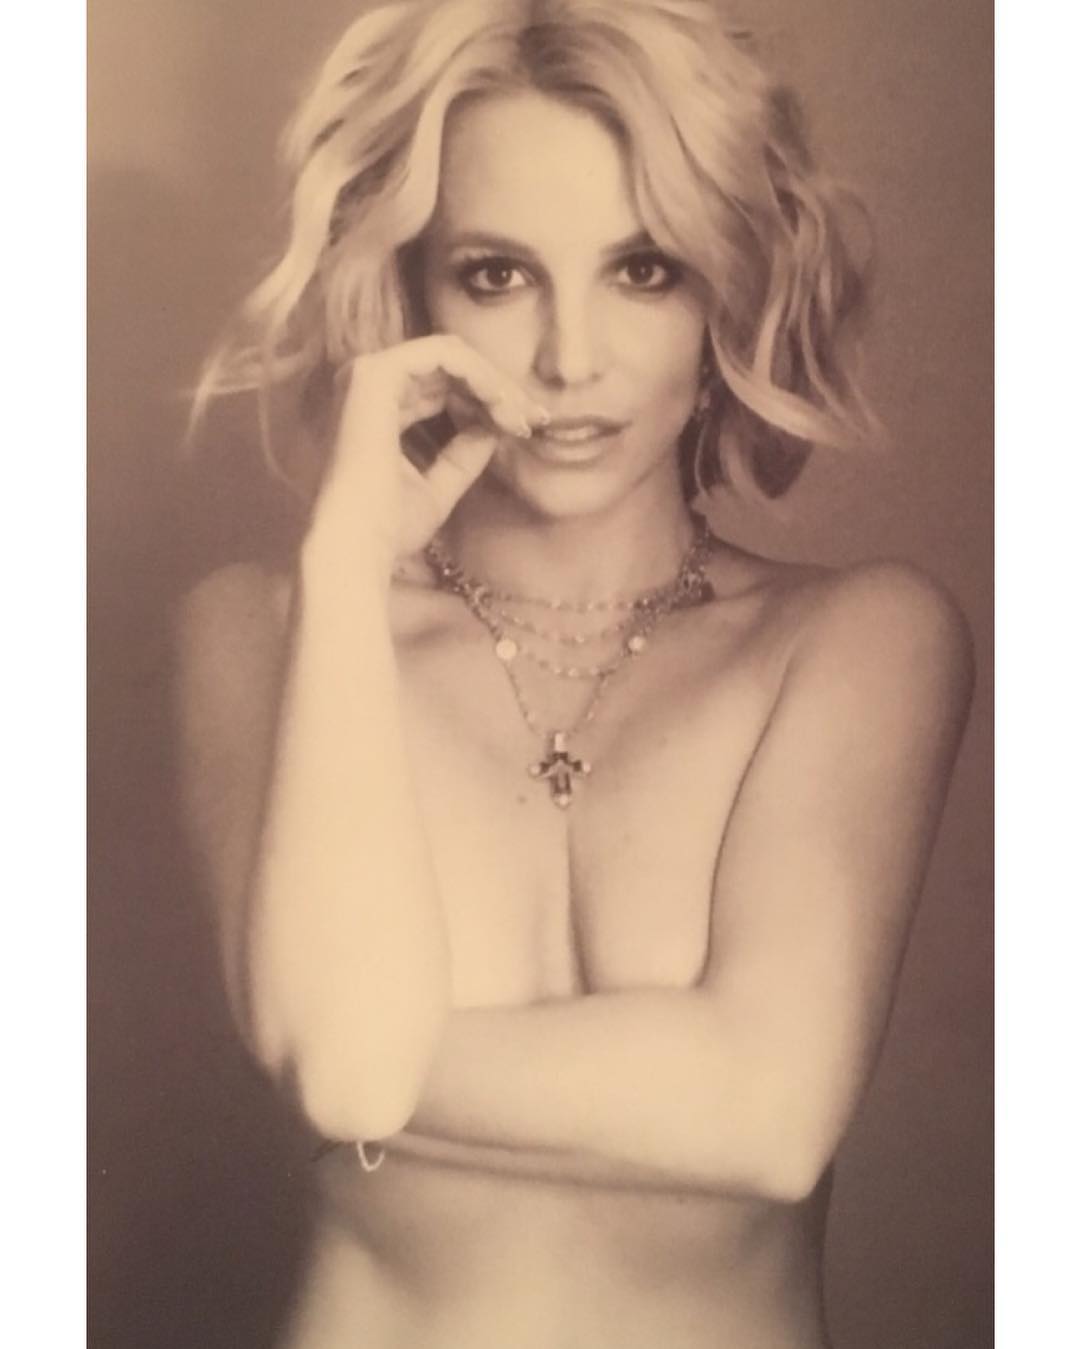 Britney Spears Completely Naked Nude Photos Comments